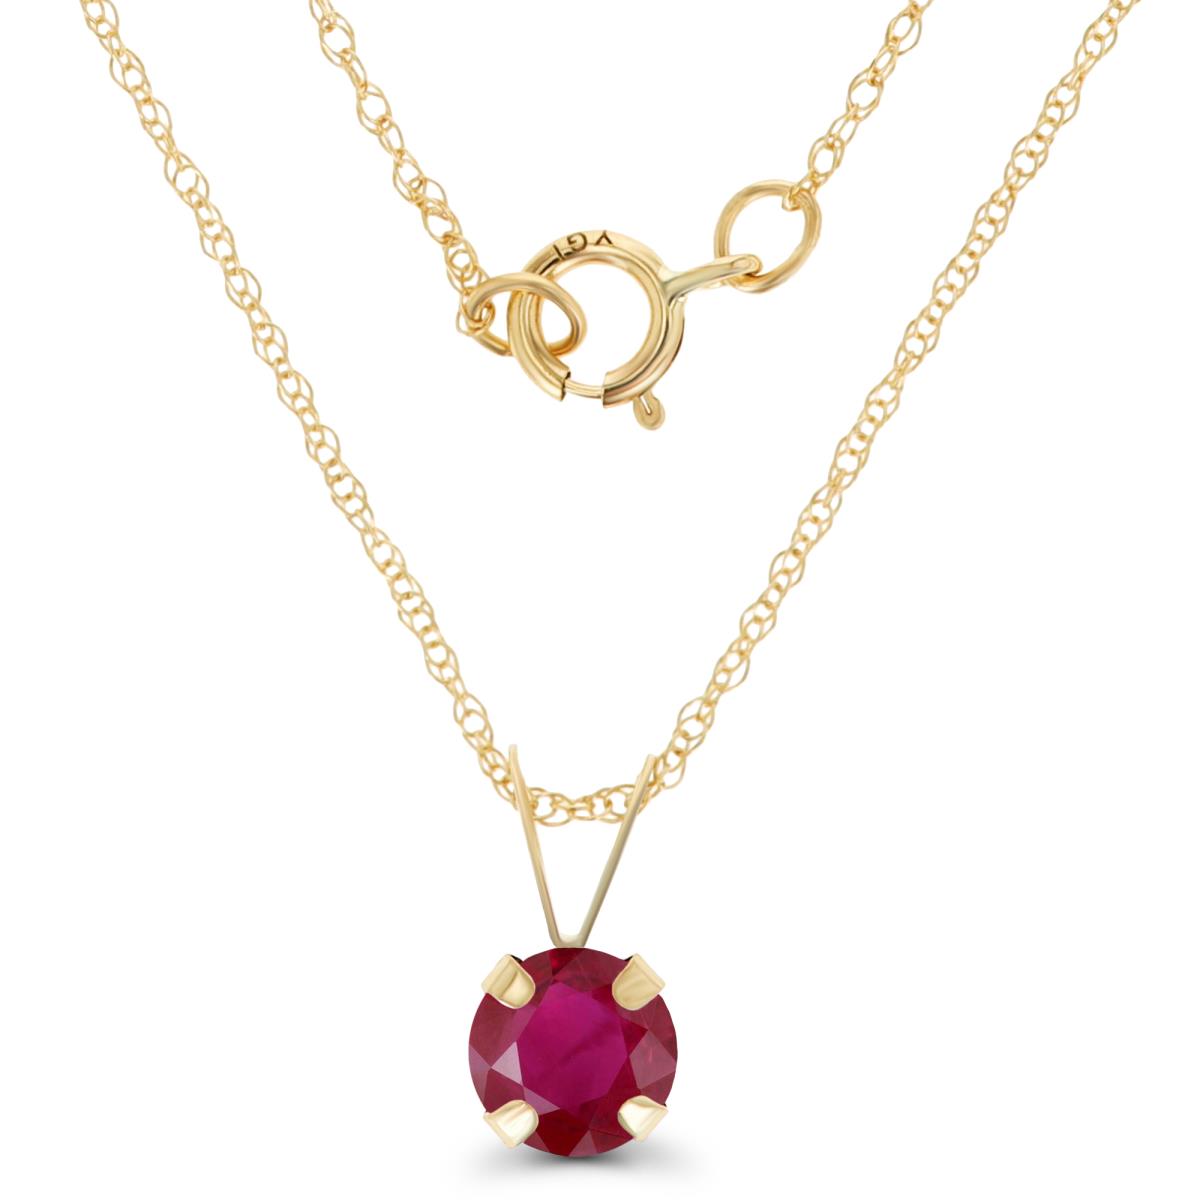 14K Yellow Gold 5mm Round Glass Filled Ruby 18" Rope Chain Necklace